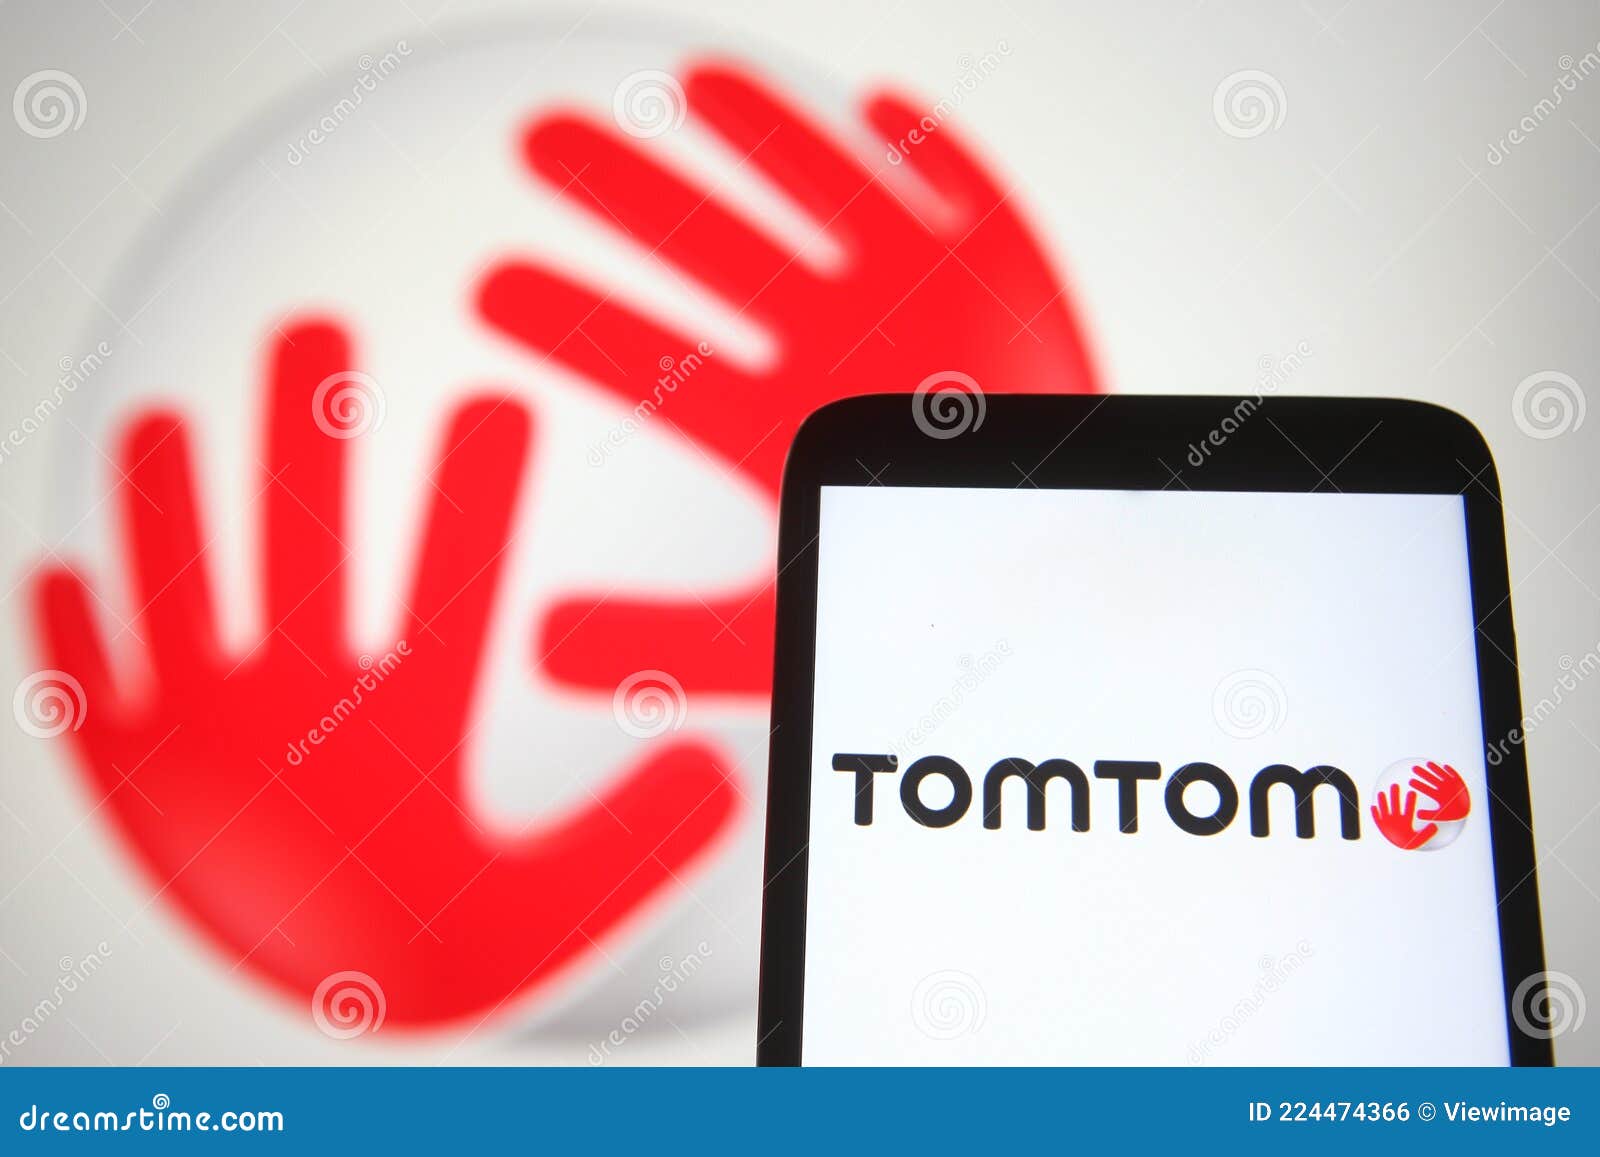 571 Tomtom Photos - Free & Stock Photos from Dreamstime